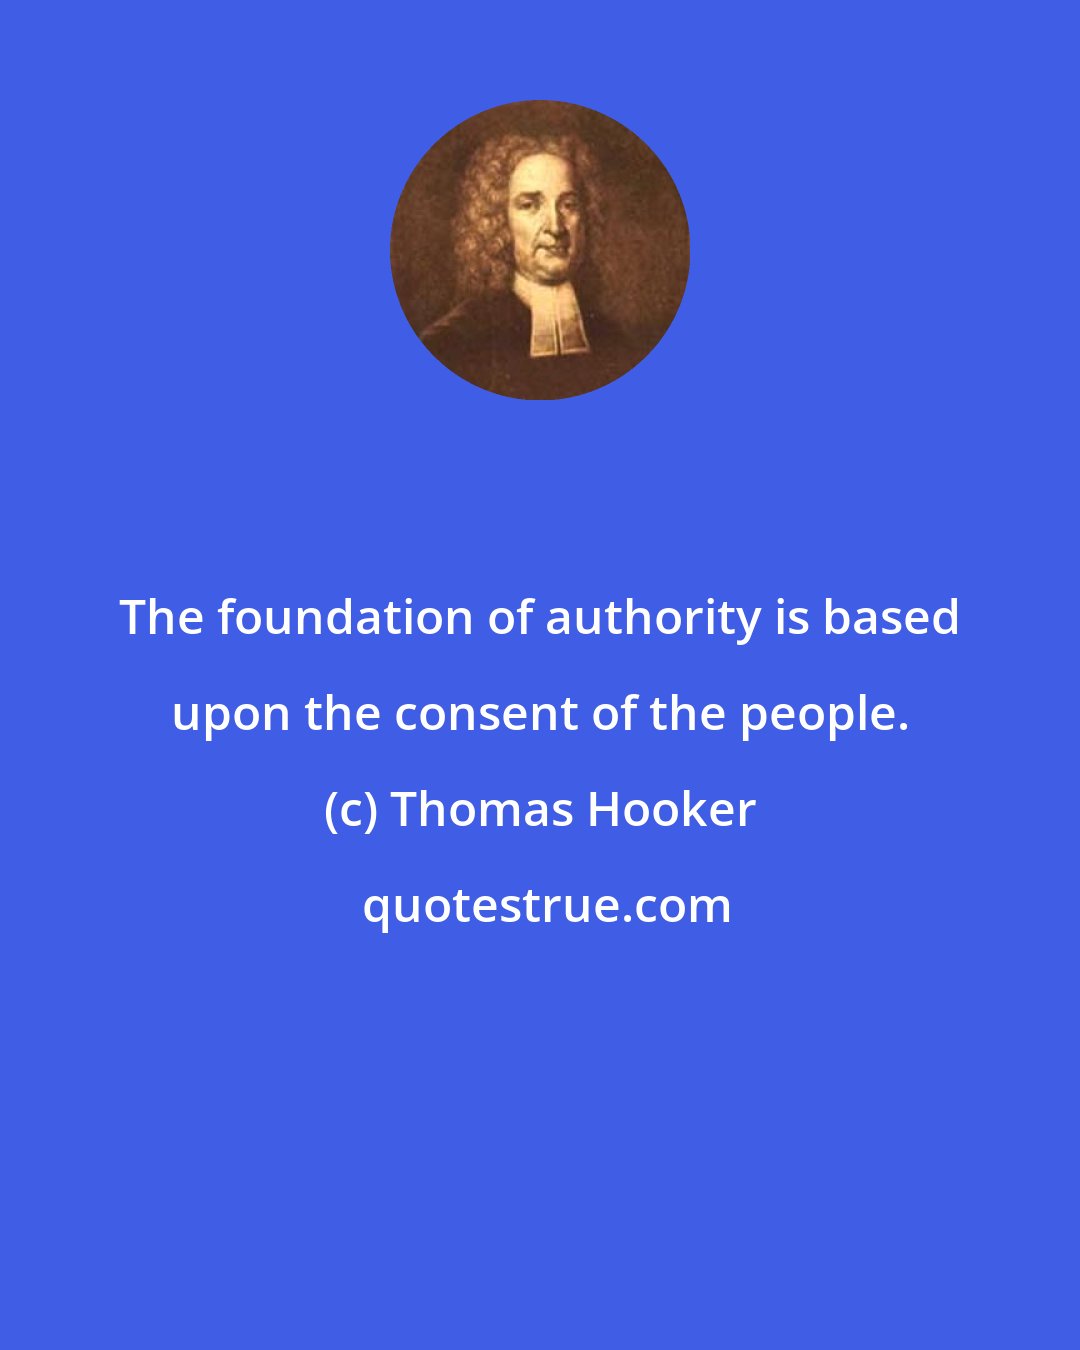 Thomas Hooker: The foundation of authority is based upon the consent of the people.